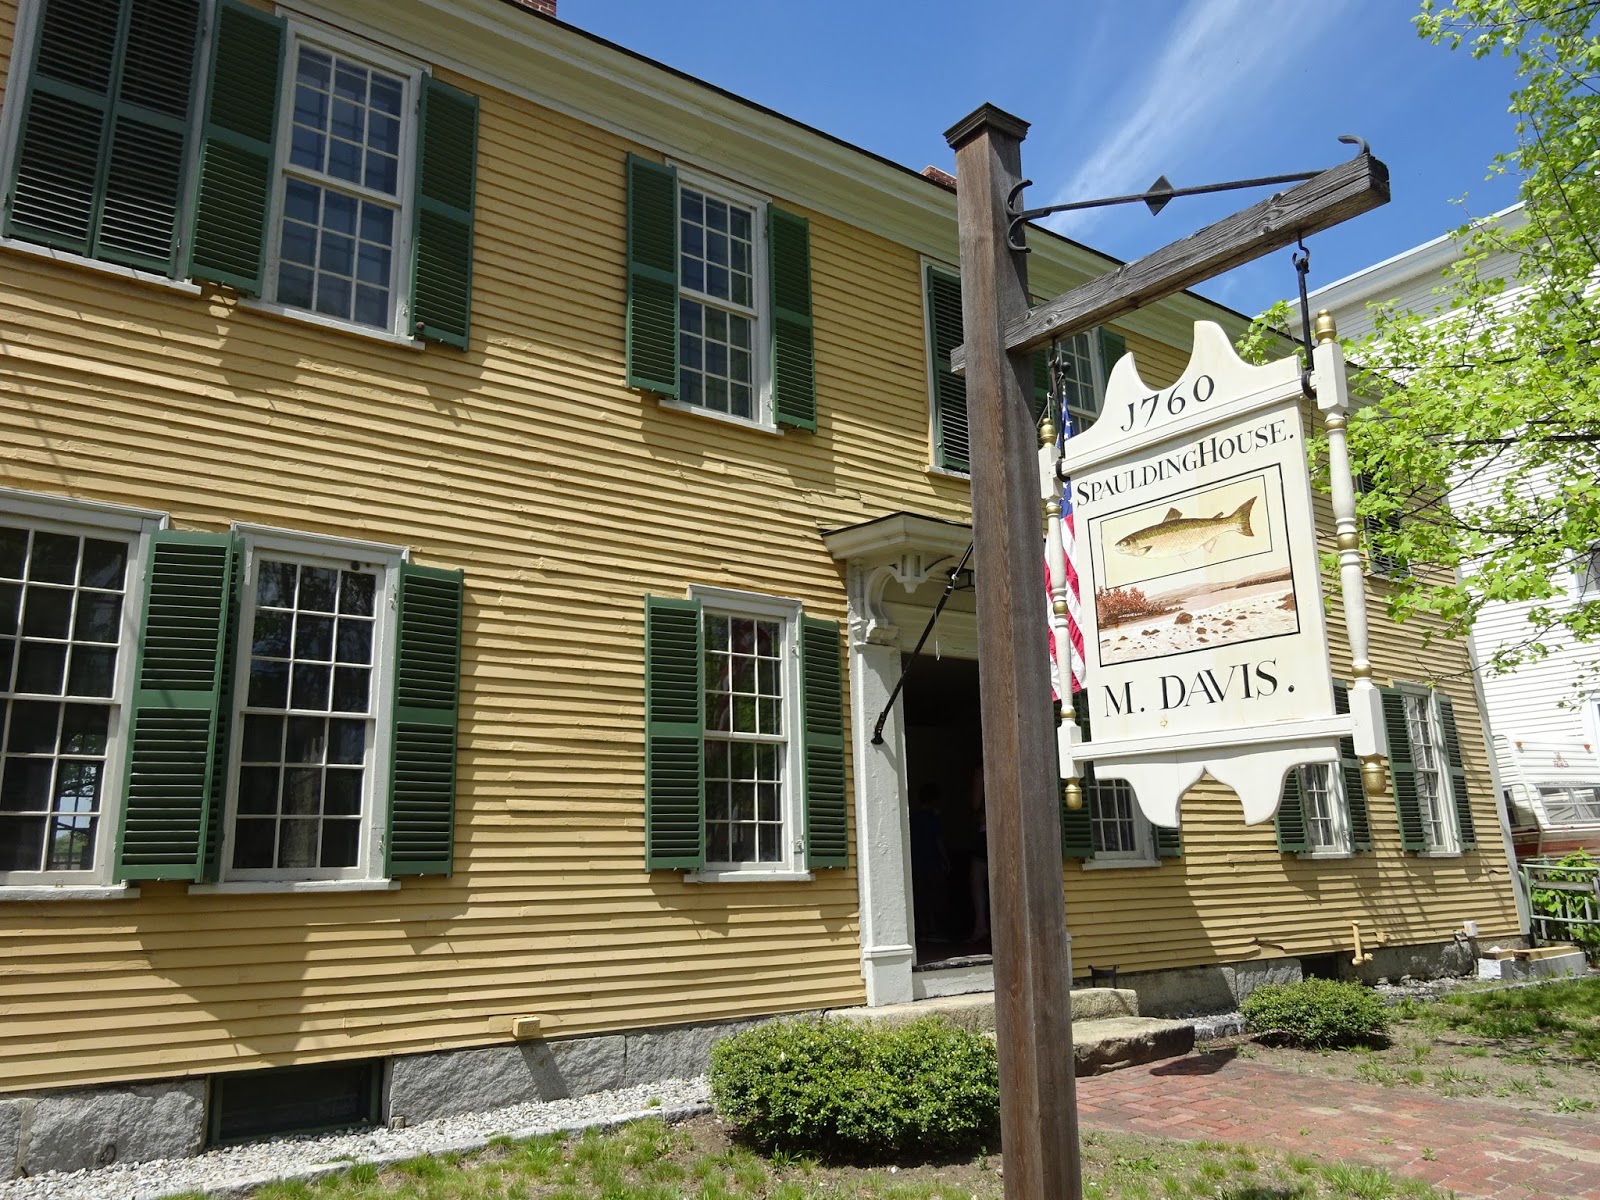 A mustard yellow house with dark green shutters and a white door, a wooden pole holds a white sign that reads 1760 Spaulding House M. Davis." In the center of the sign is a fish and a river bank